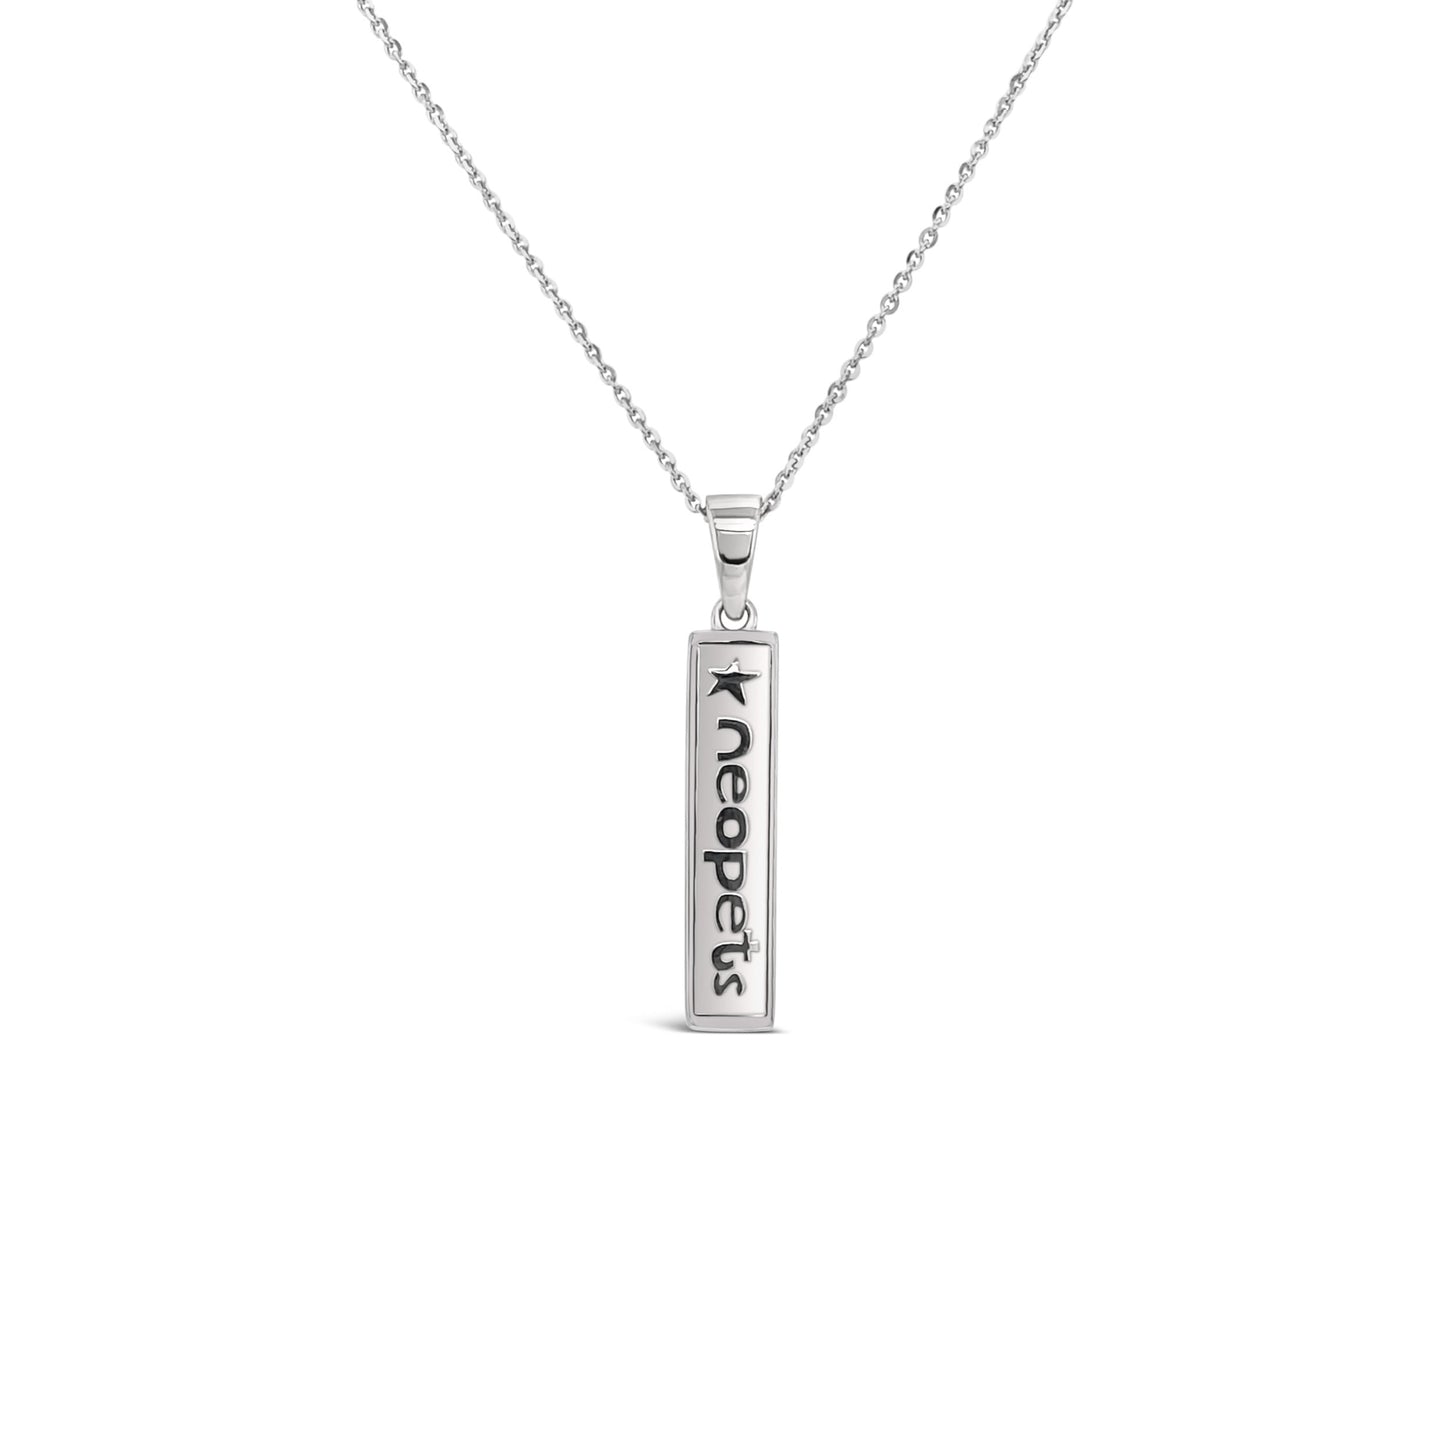 Neopets Bar Necklace